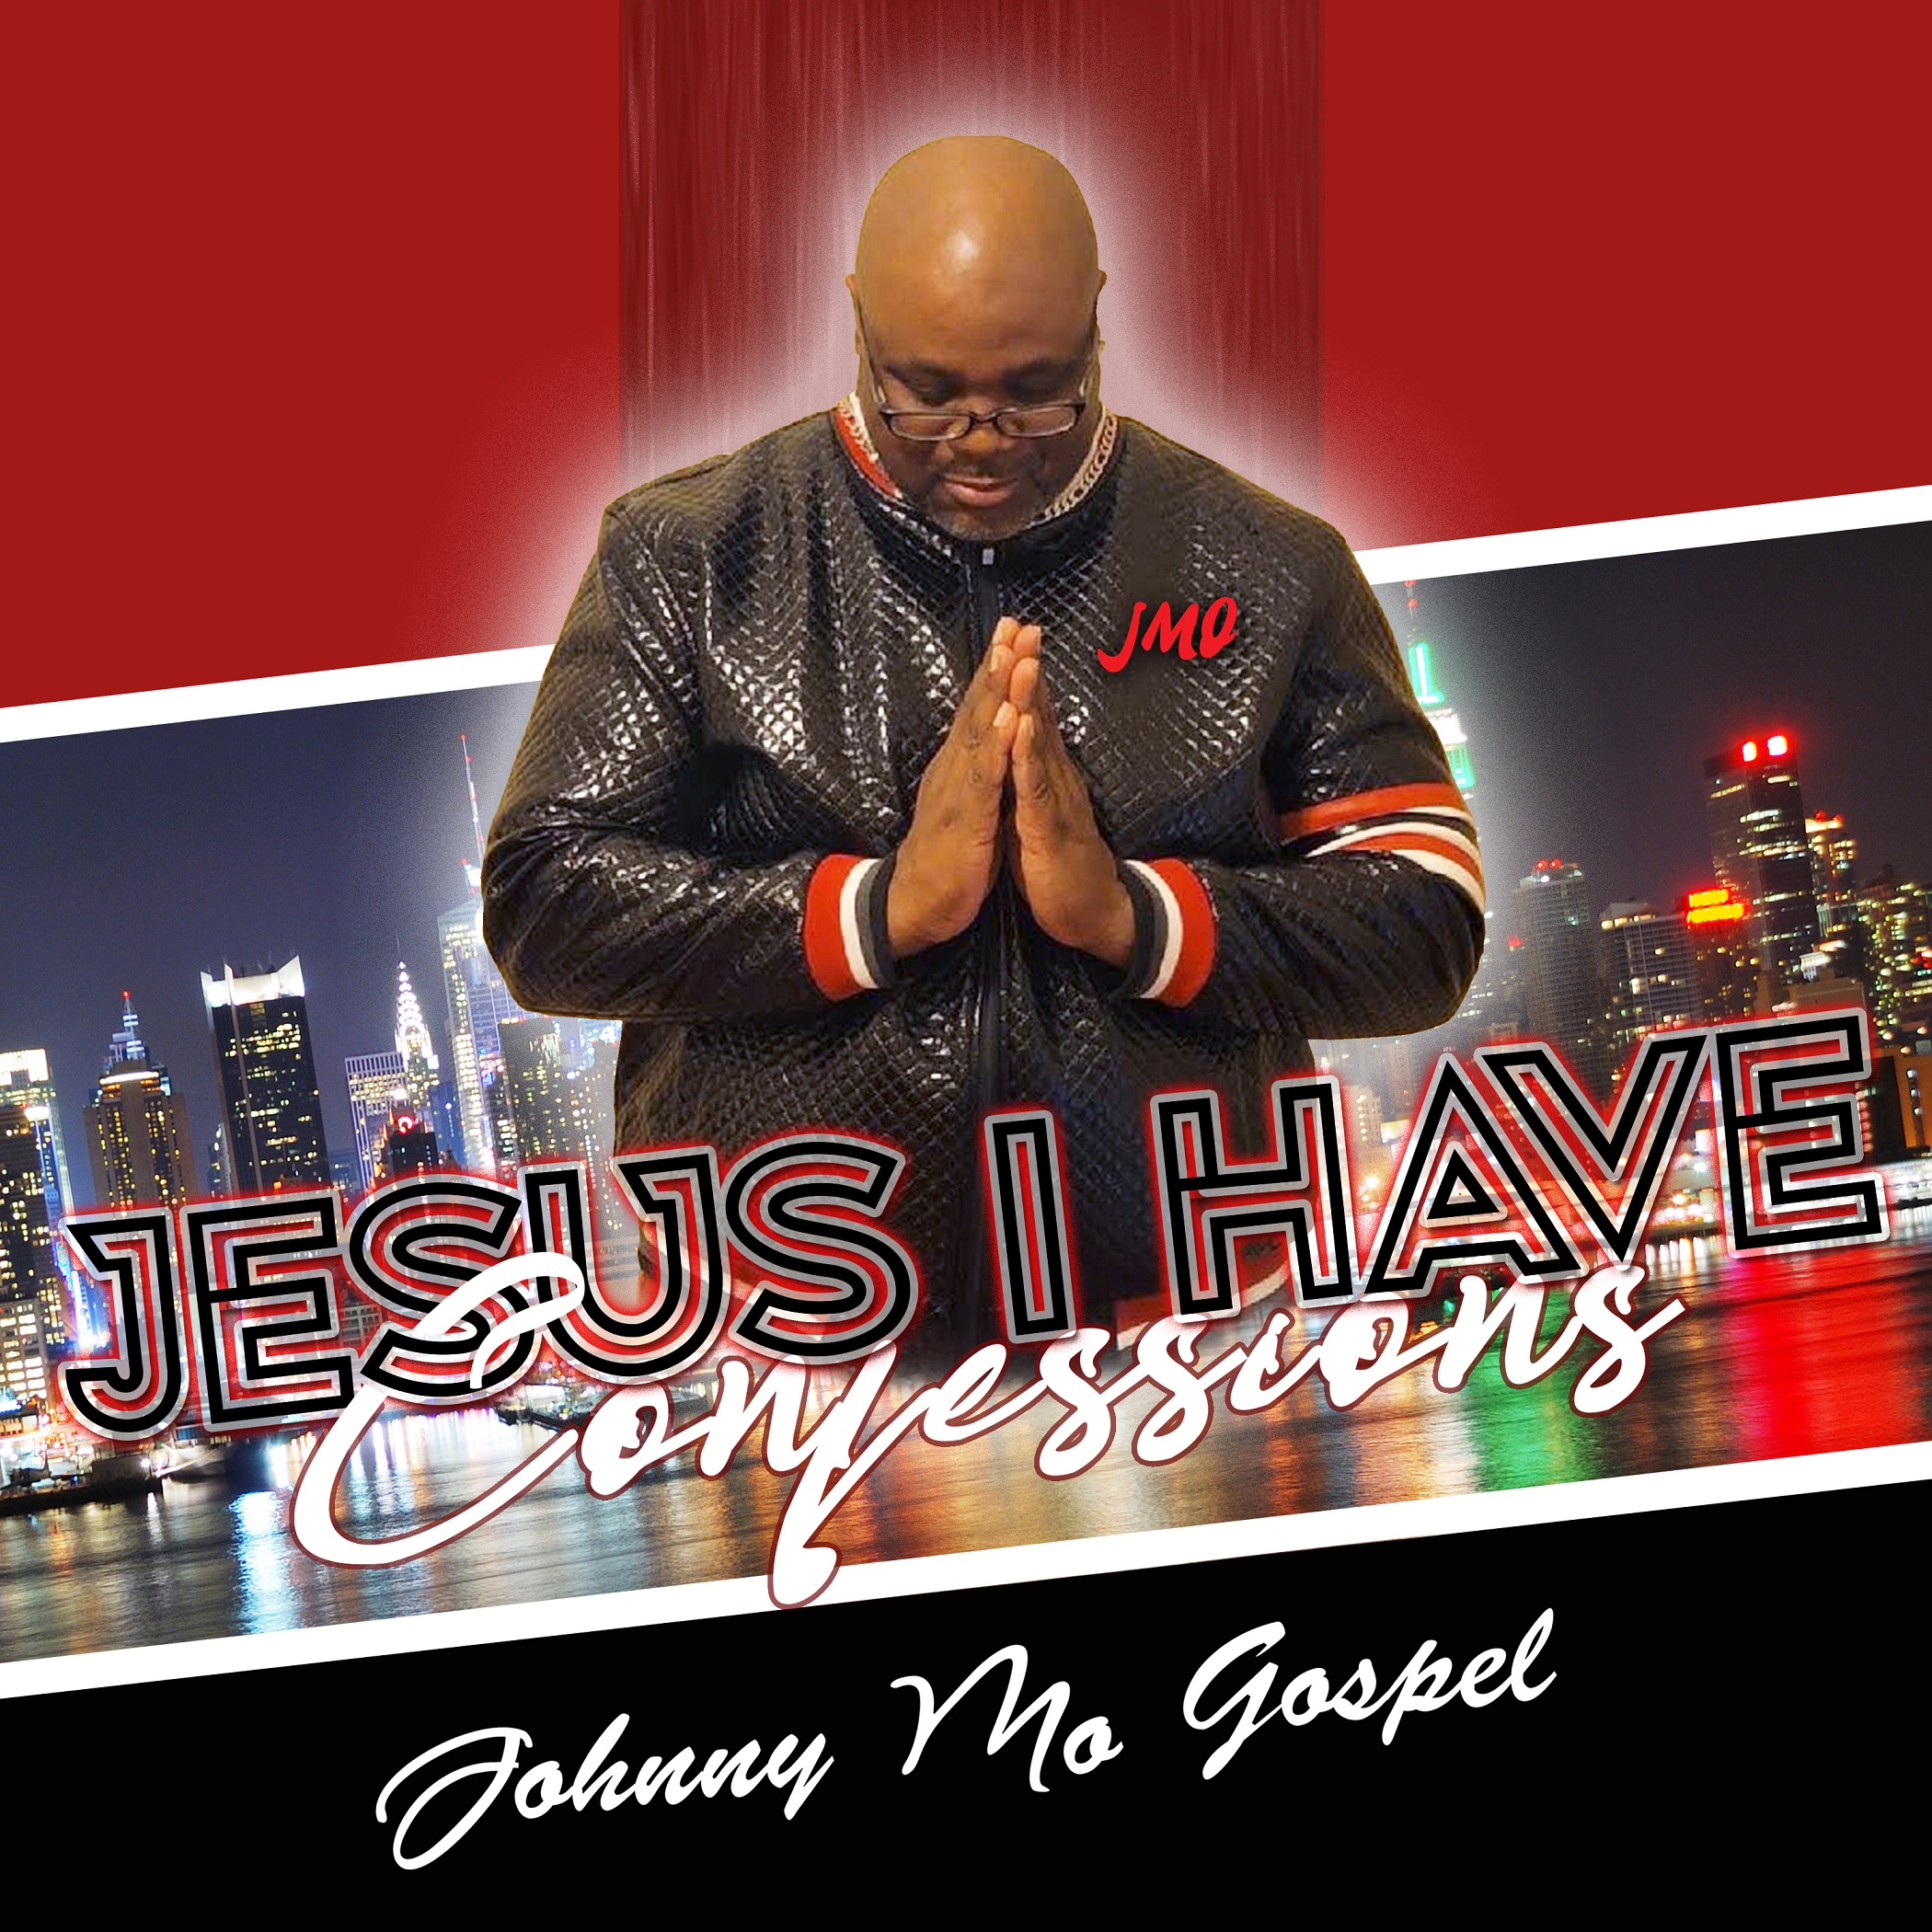 Asking For Forgiveness And Redemption On The Path To Improving His Relationship With God: Johnny Mo Gospel Releases New 14 Song Digital Gospel/ Christian CD Project “Jesus I Have Confessions”